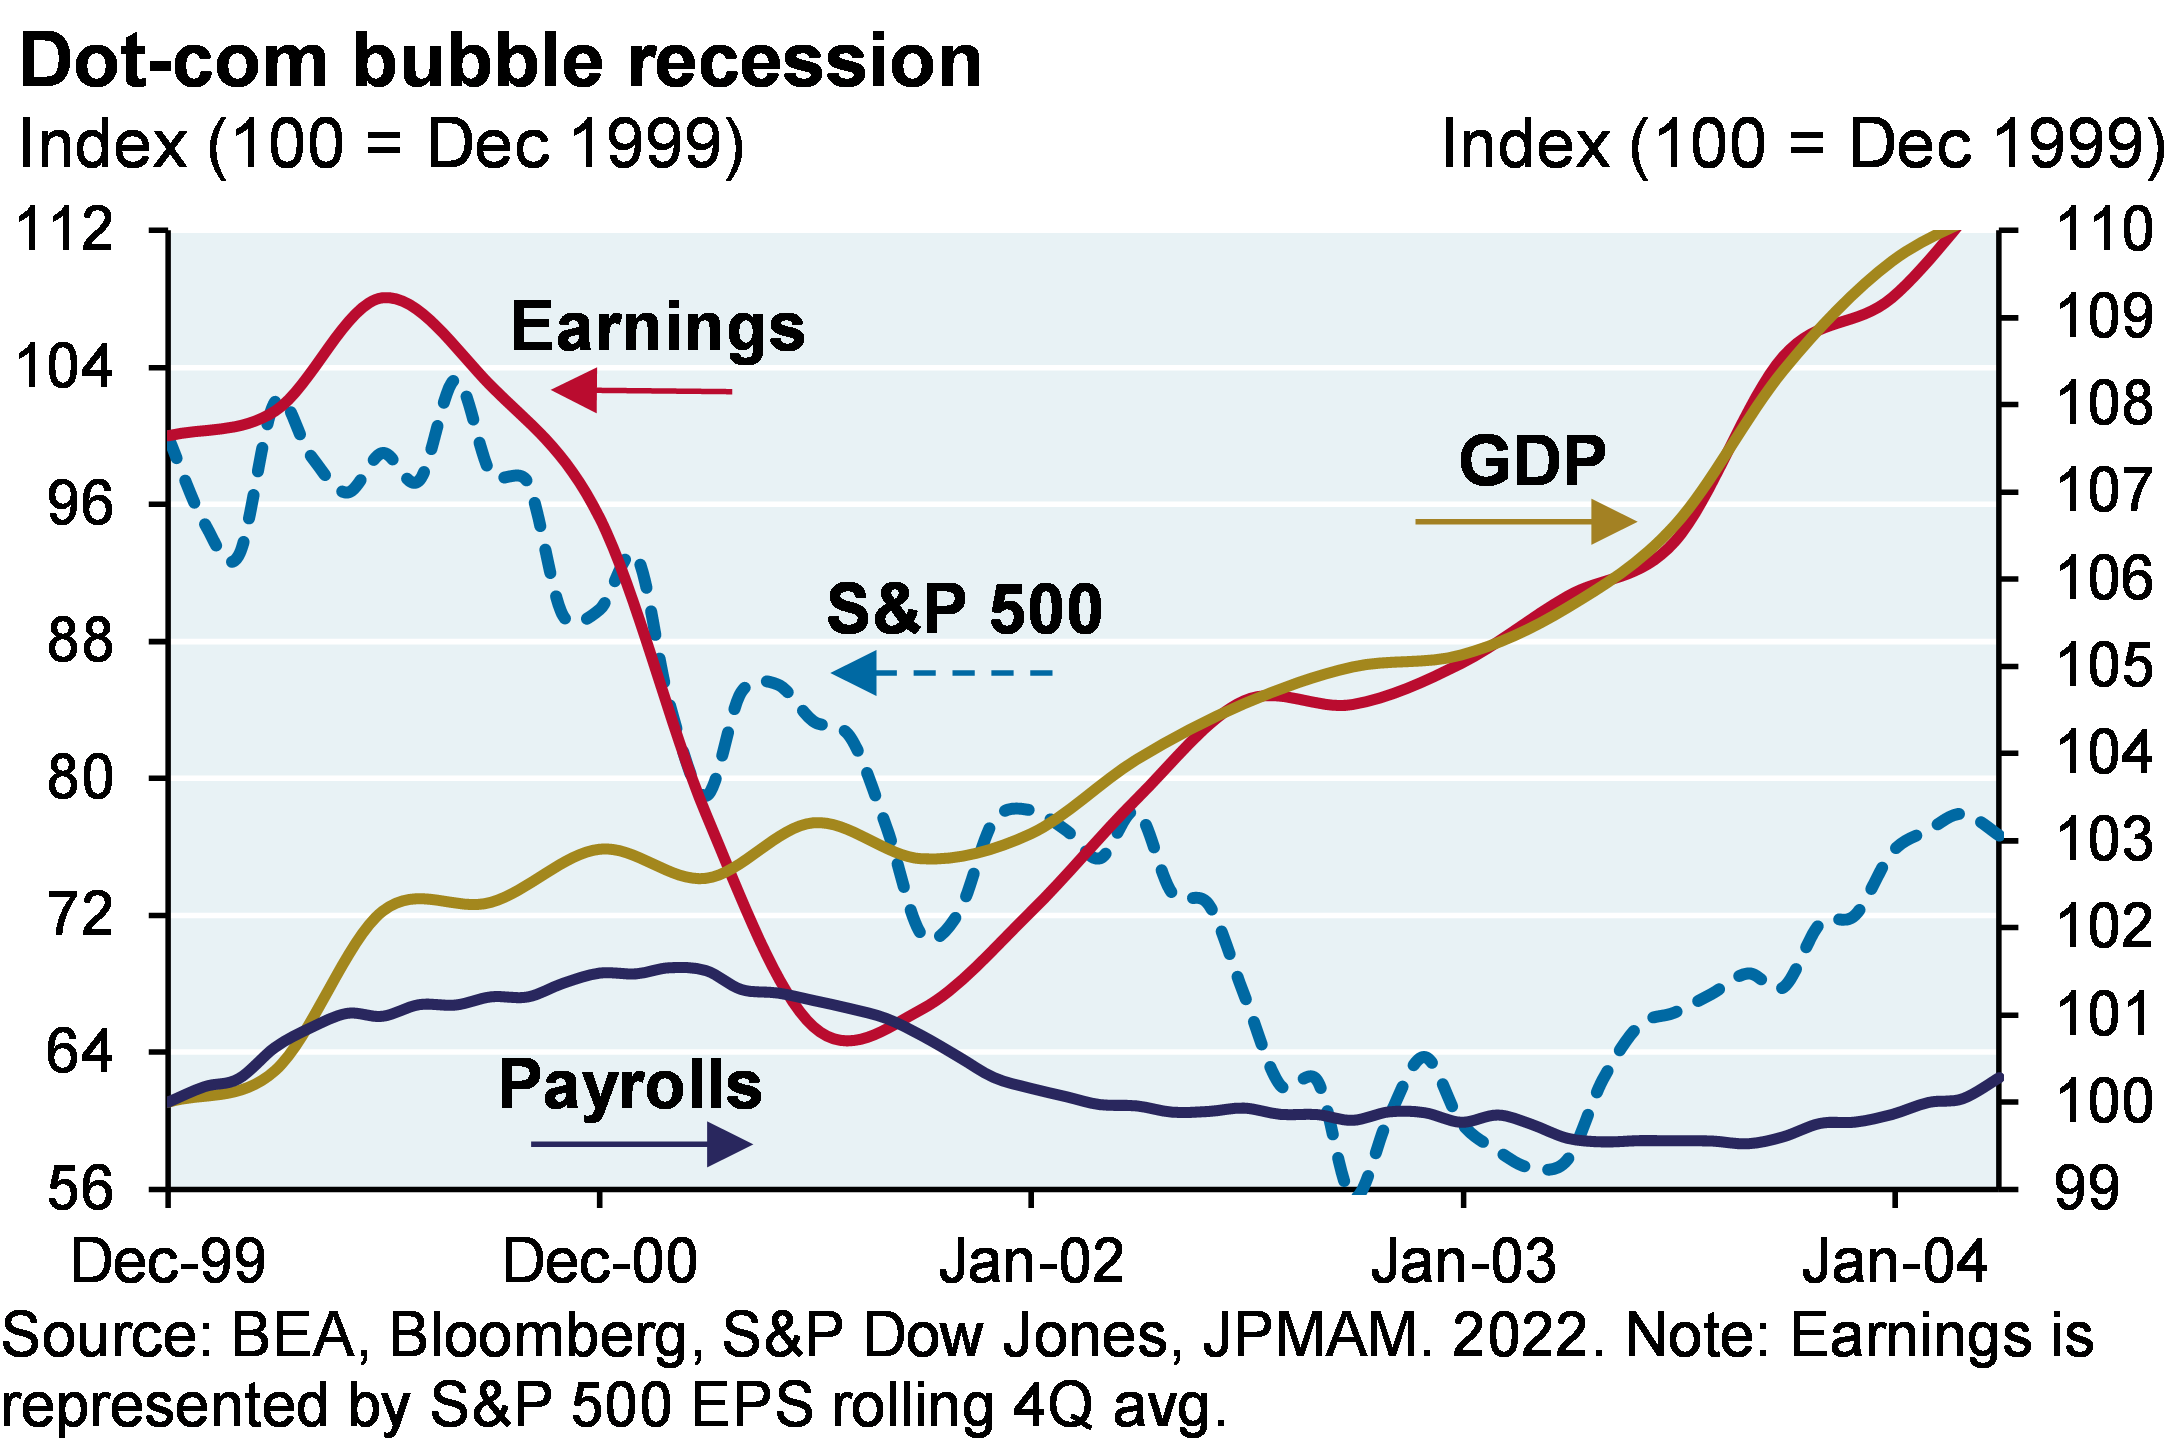 The indexed line chart compares the S&P 500, GDP, Earnings, and Nonfarm Payrolls throughout the dot-com bubble recession from December 1999 to March 2004. Earnings bottomed in June 2001, followed by the S&P 500 in September 2002. However, GDP bottomed in March 2001, while Payrolls began declining in April 2001.